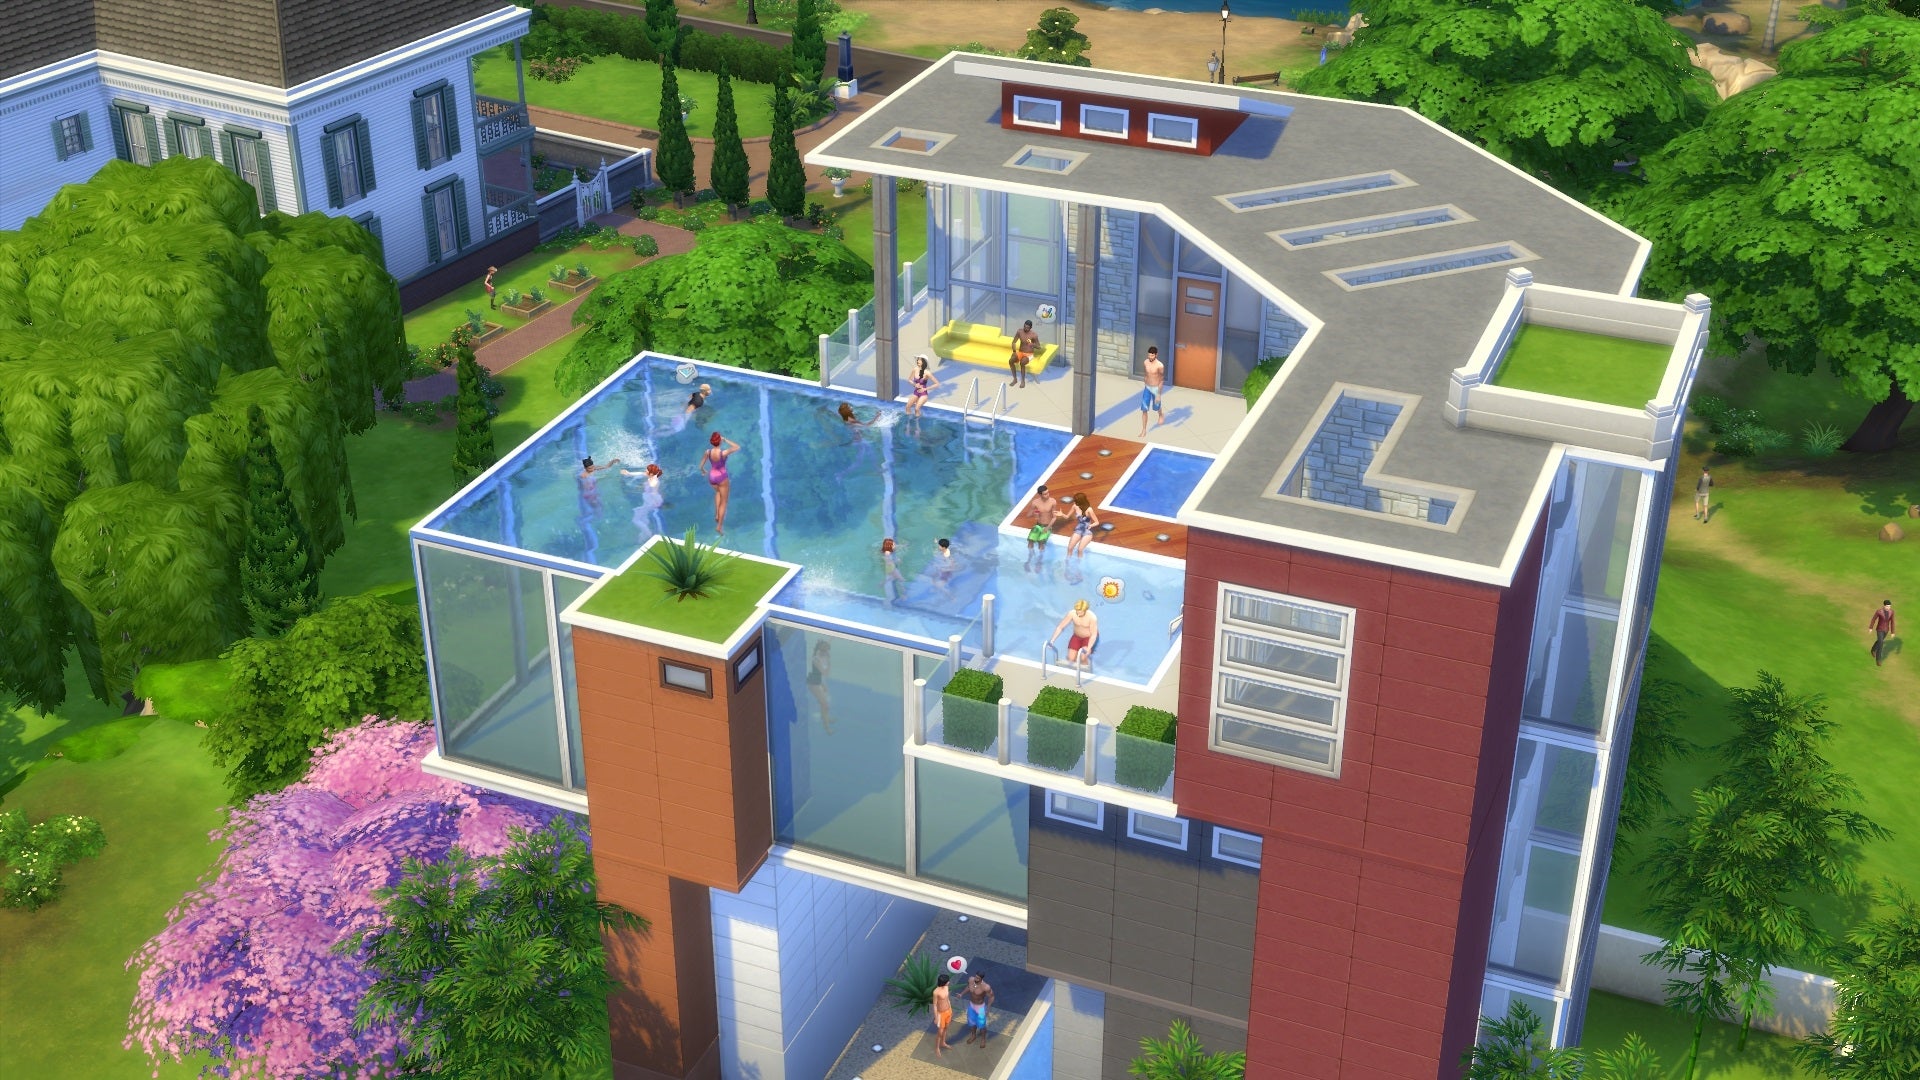 Ps sim. The SIMS 4. Motherlode SIMS 4. Дом симс 3 с бассейном. Симс 4 бассейн на крыше.